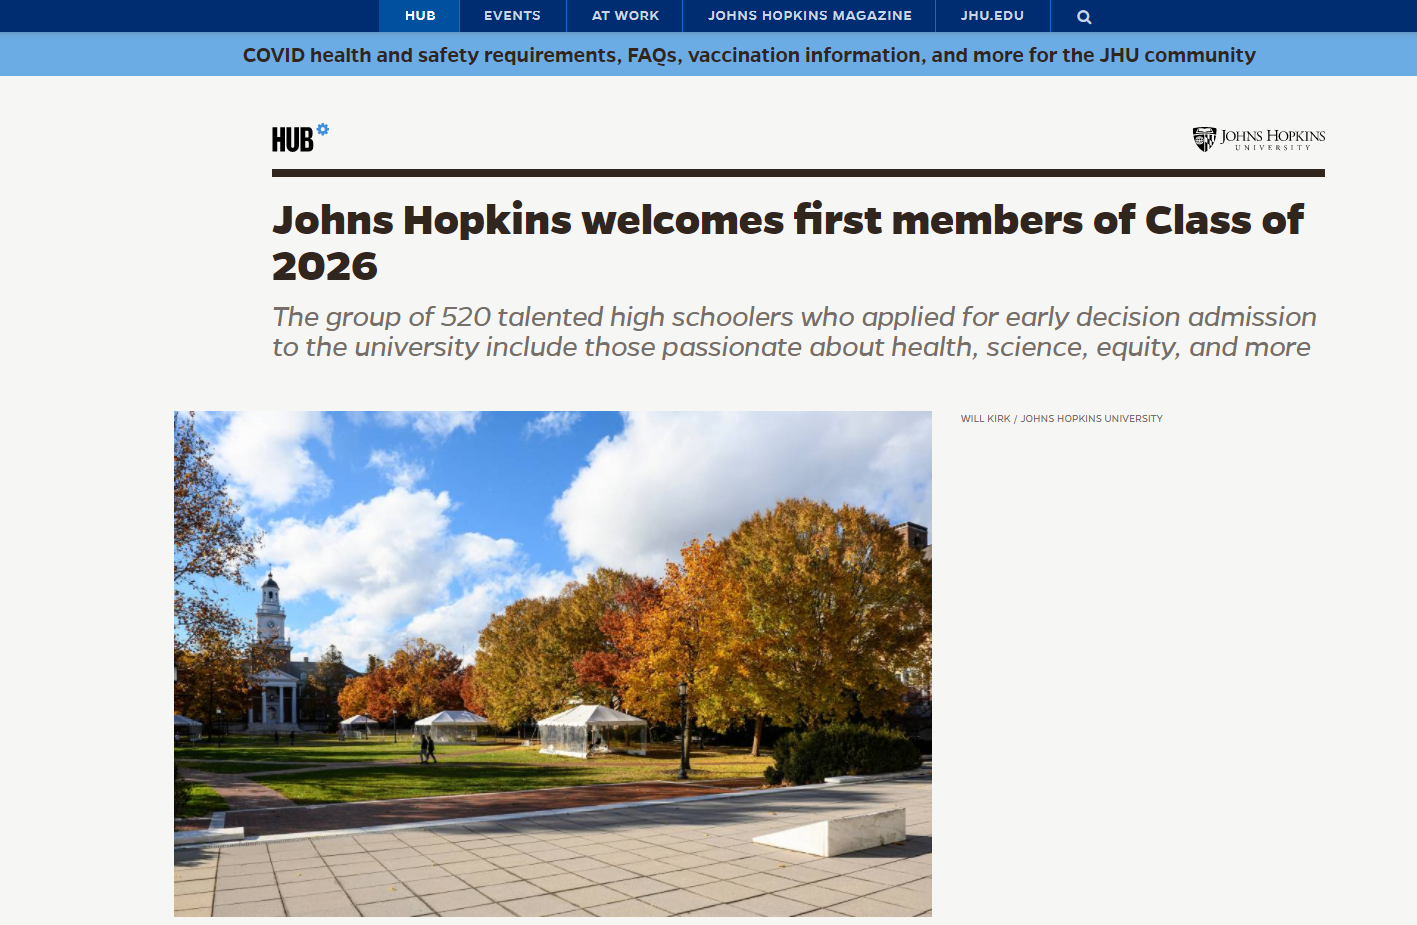 Johns Hopkins University is proud to invite 1,592 more applicants